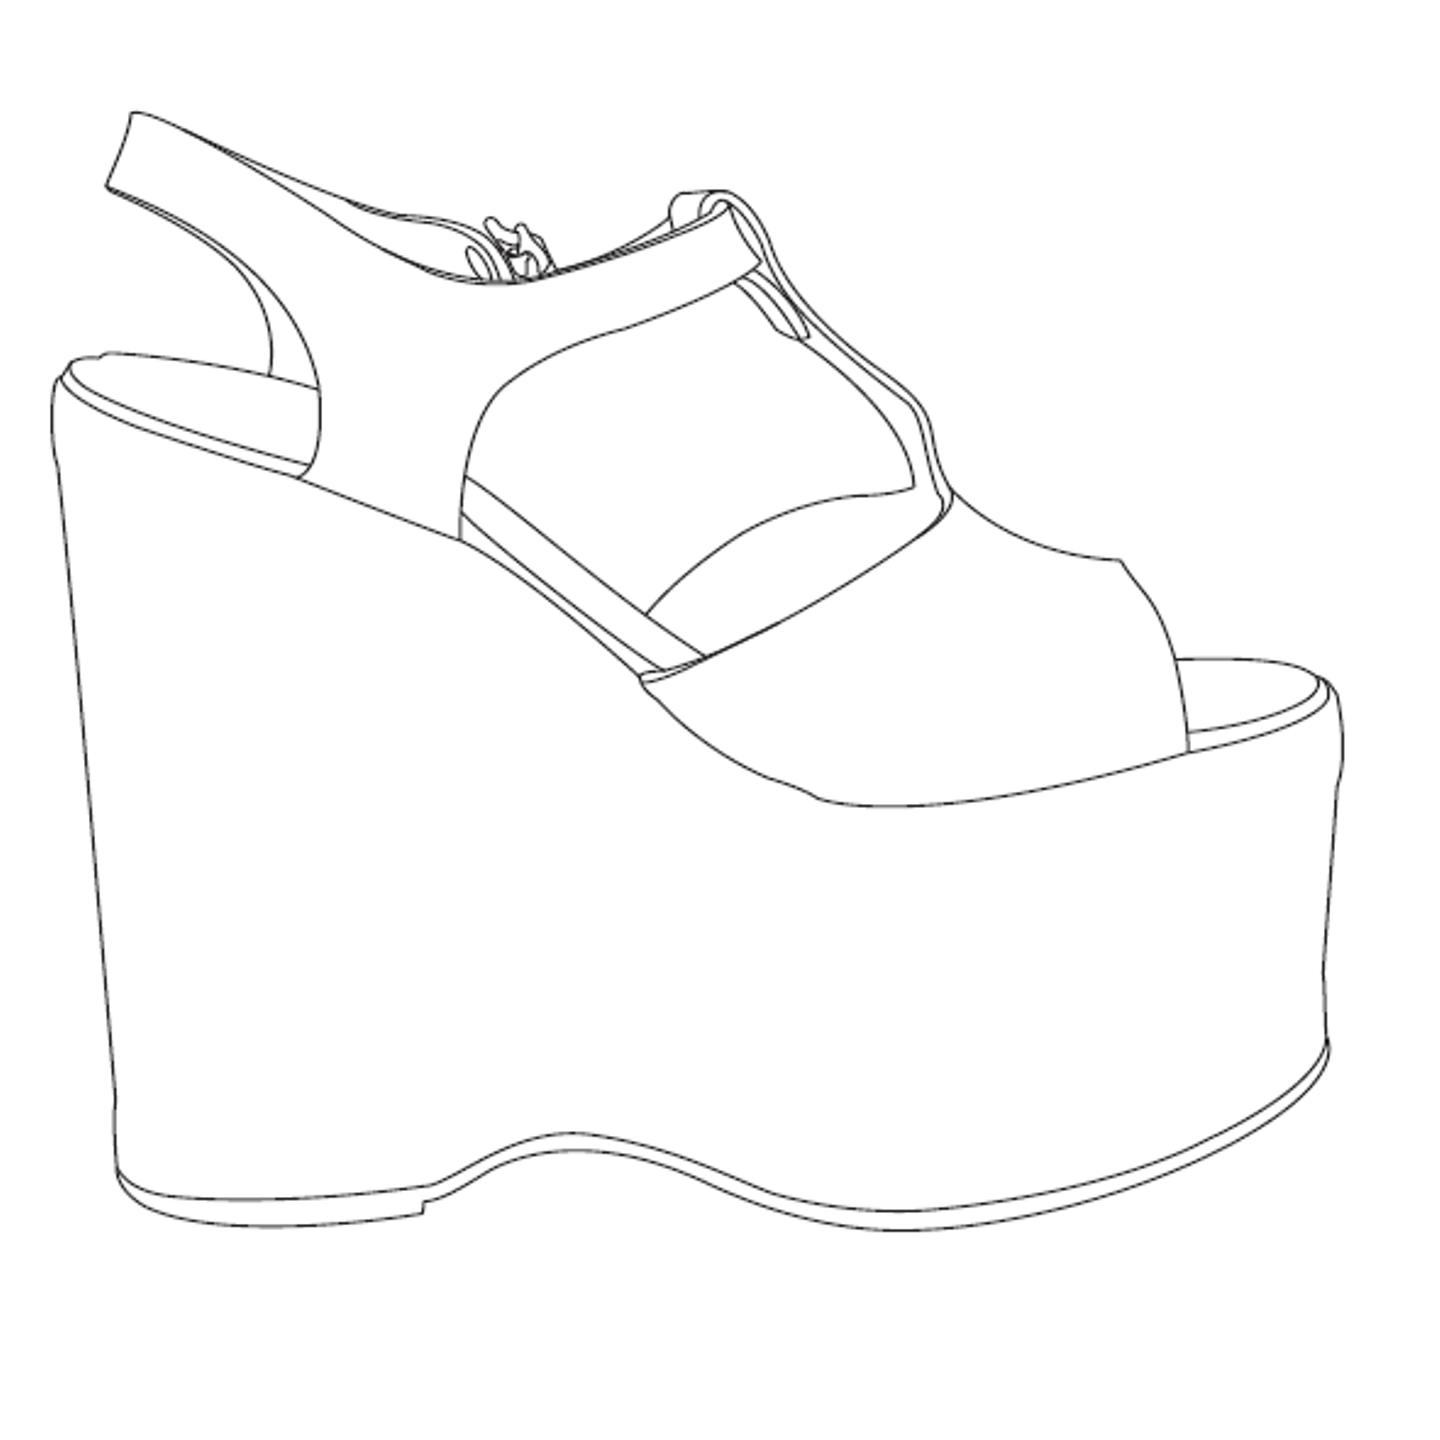 Shoe Drawing Template at GetDrawings Free download